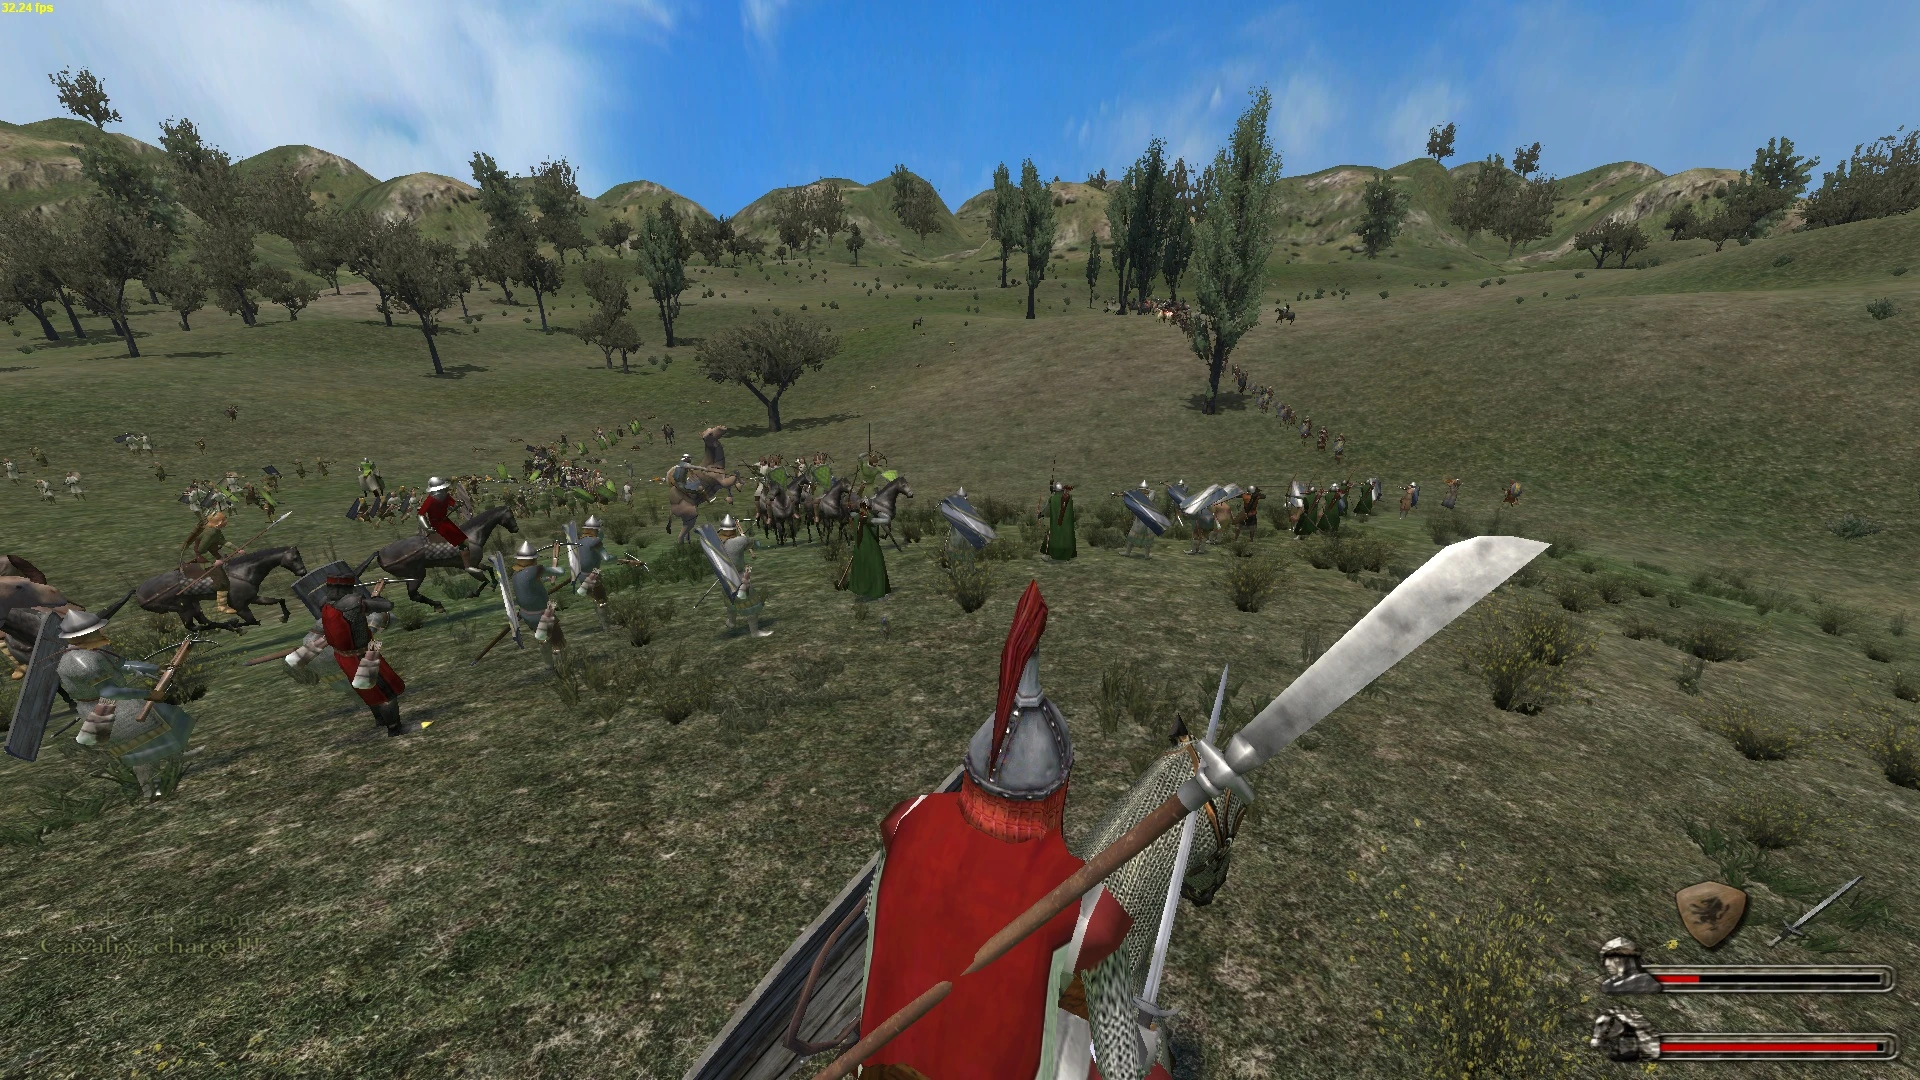 Warband войско. Mount and Blade 1. Mount and Blade 1.011. Mount & Blade Перисно. Маунт блейд Sword of Damocles.